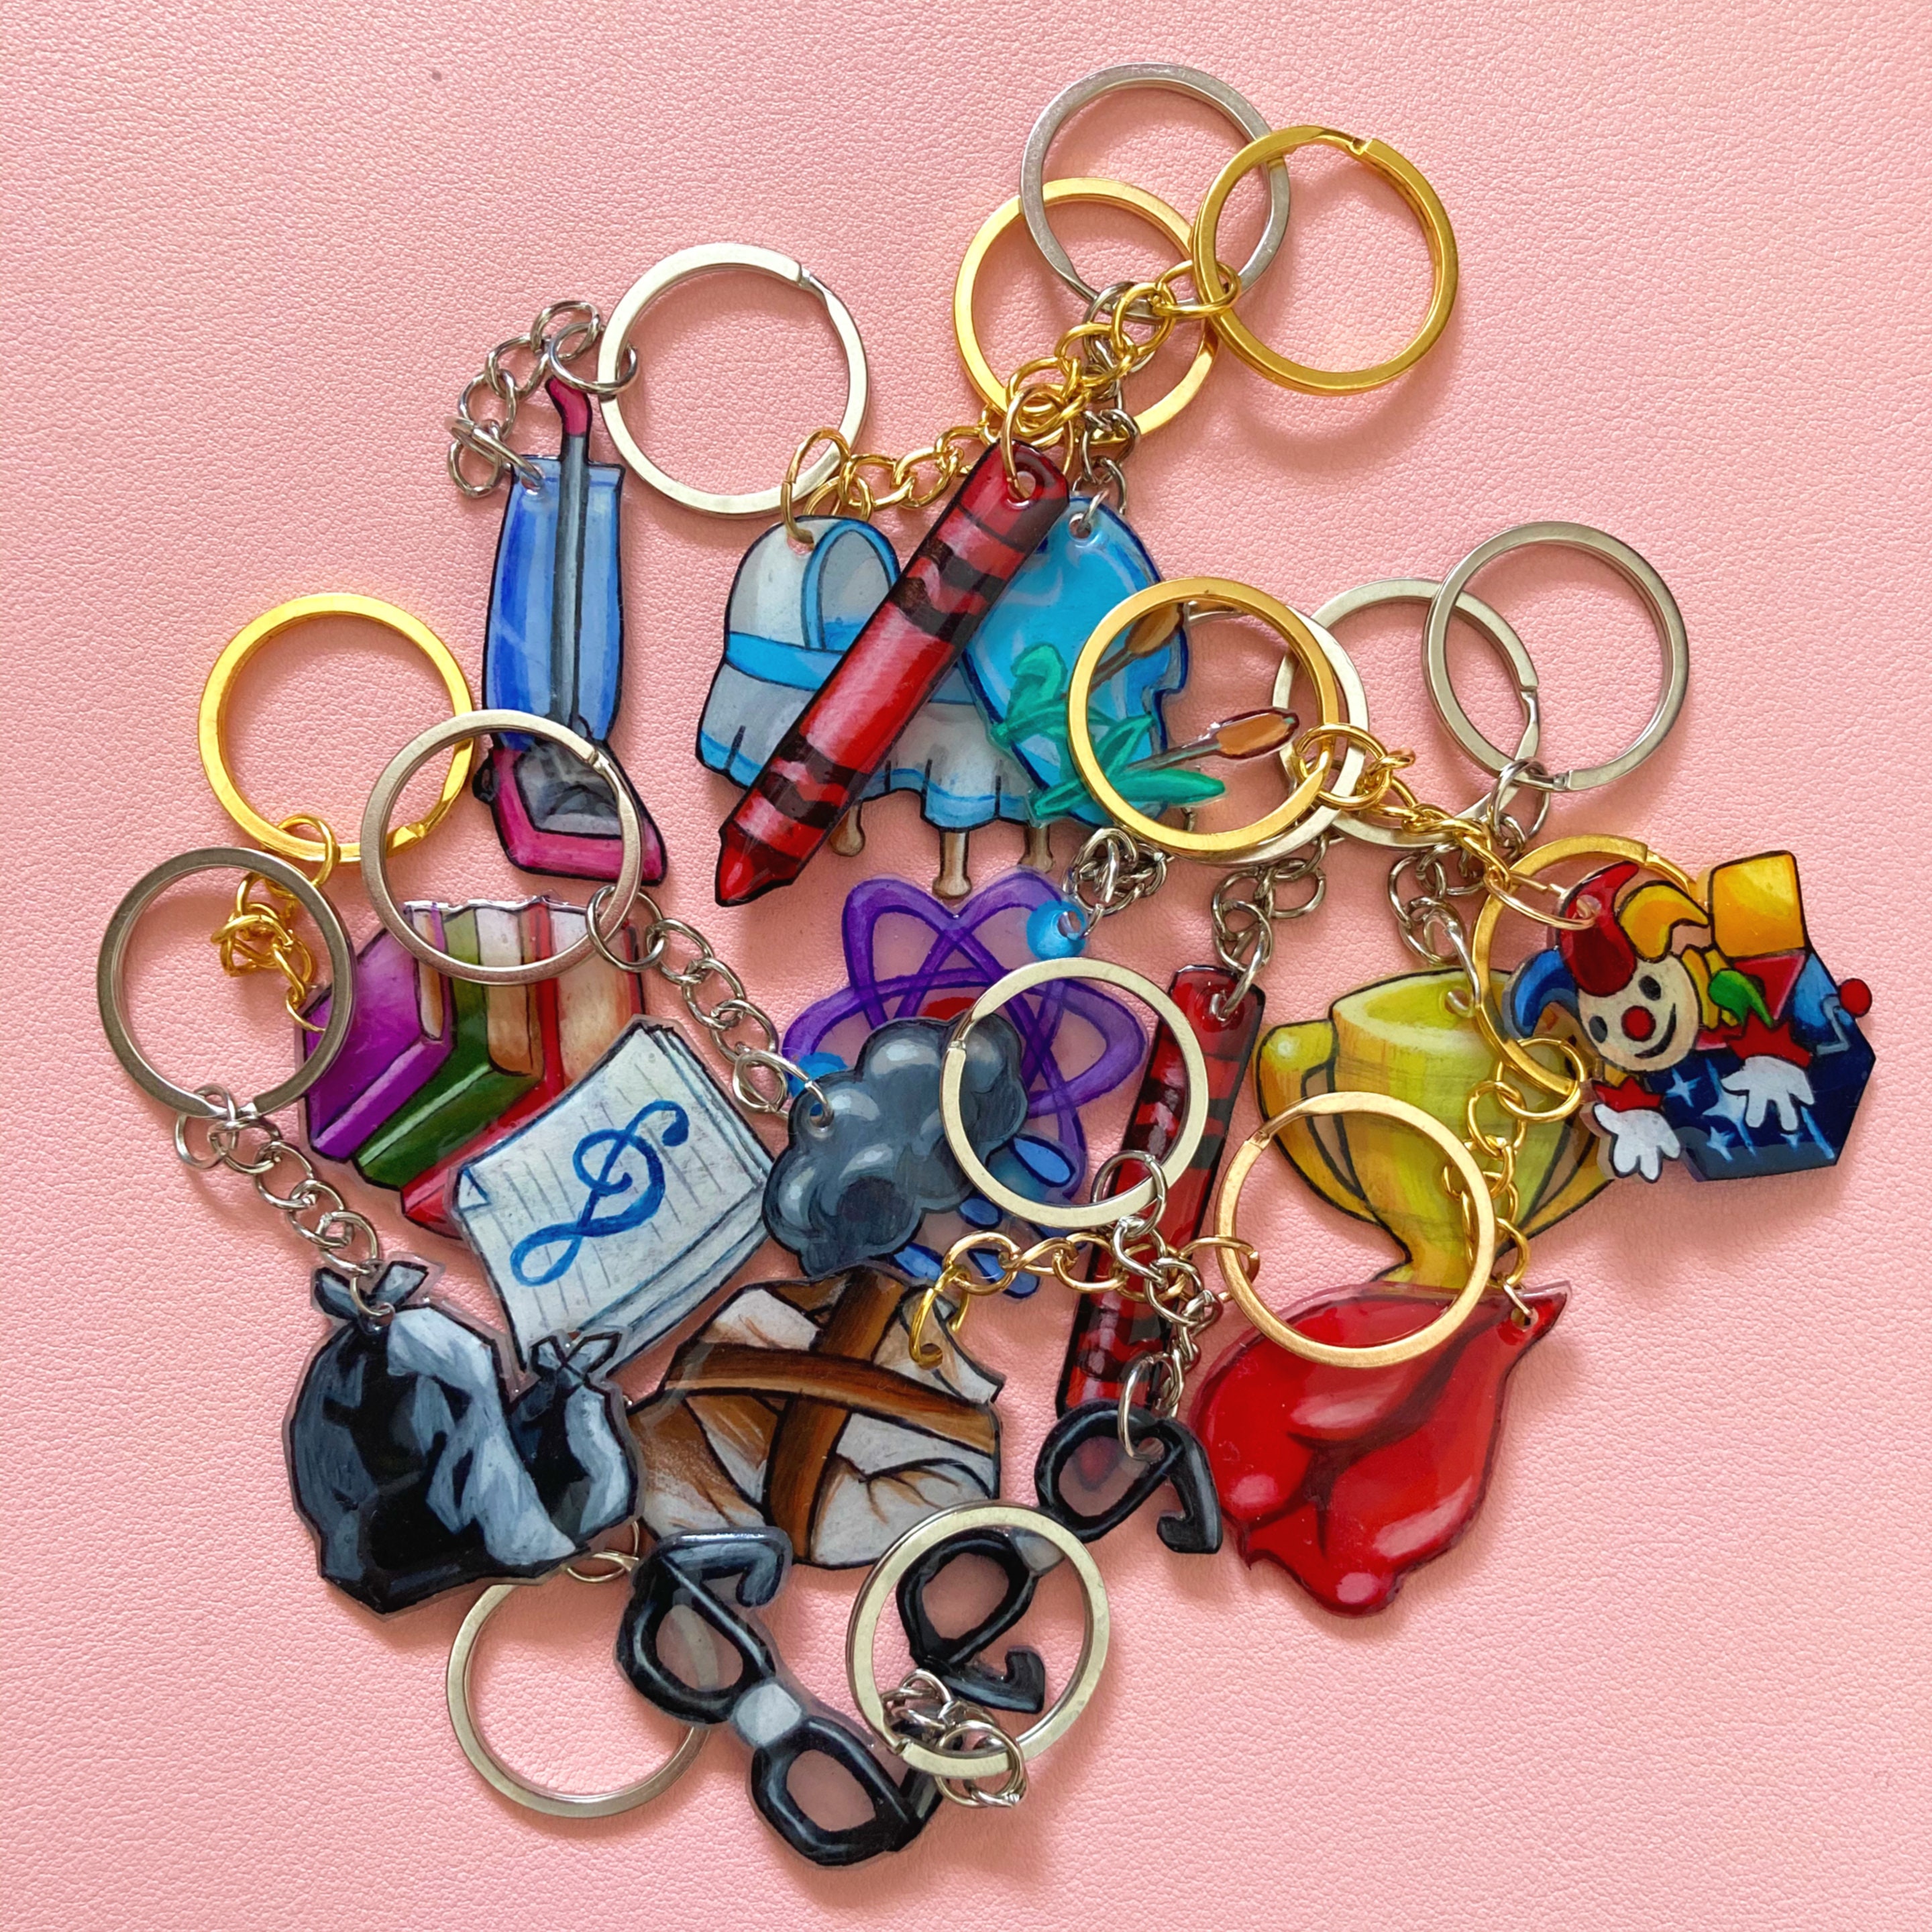 Repurposed Minnie Mouse keychain charm – The Sims Shop